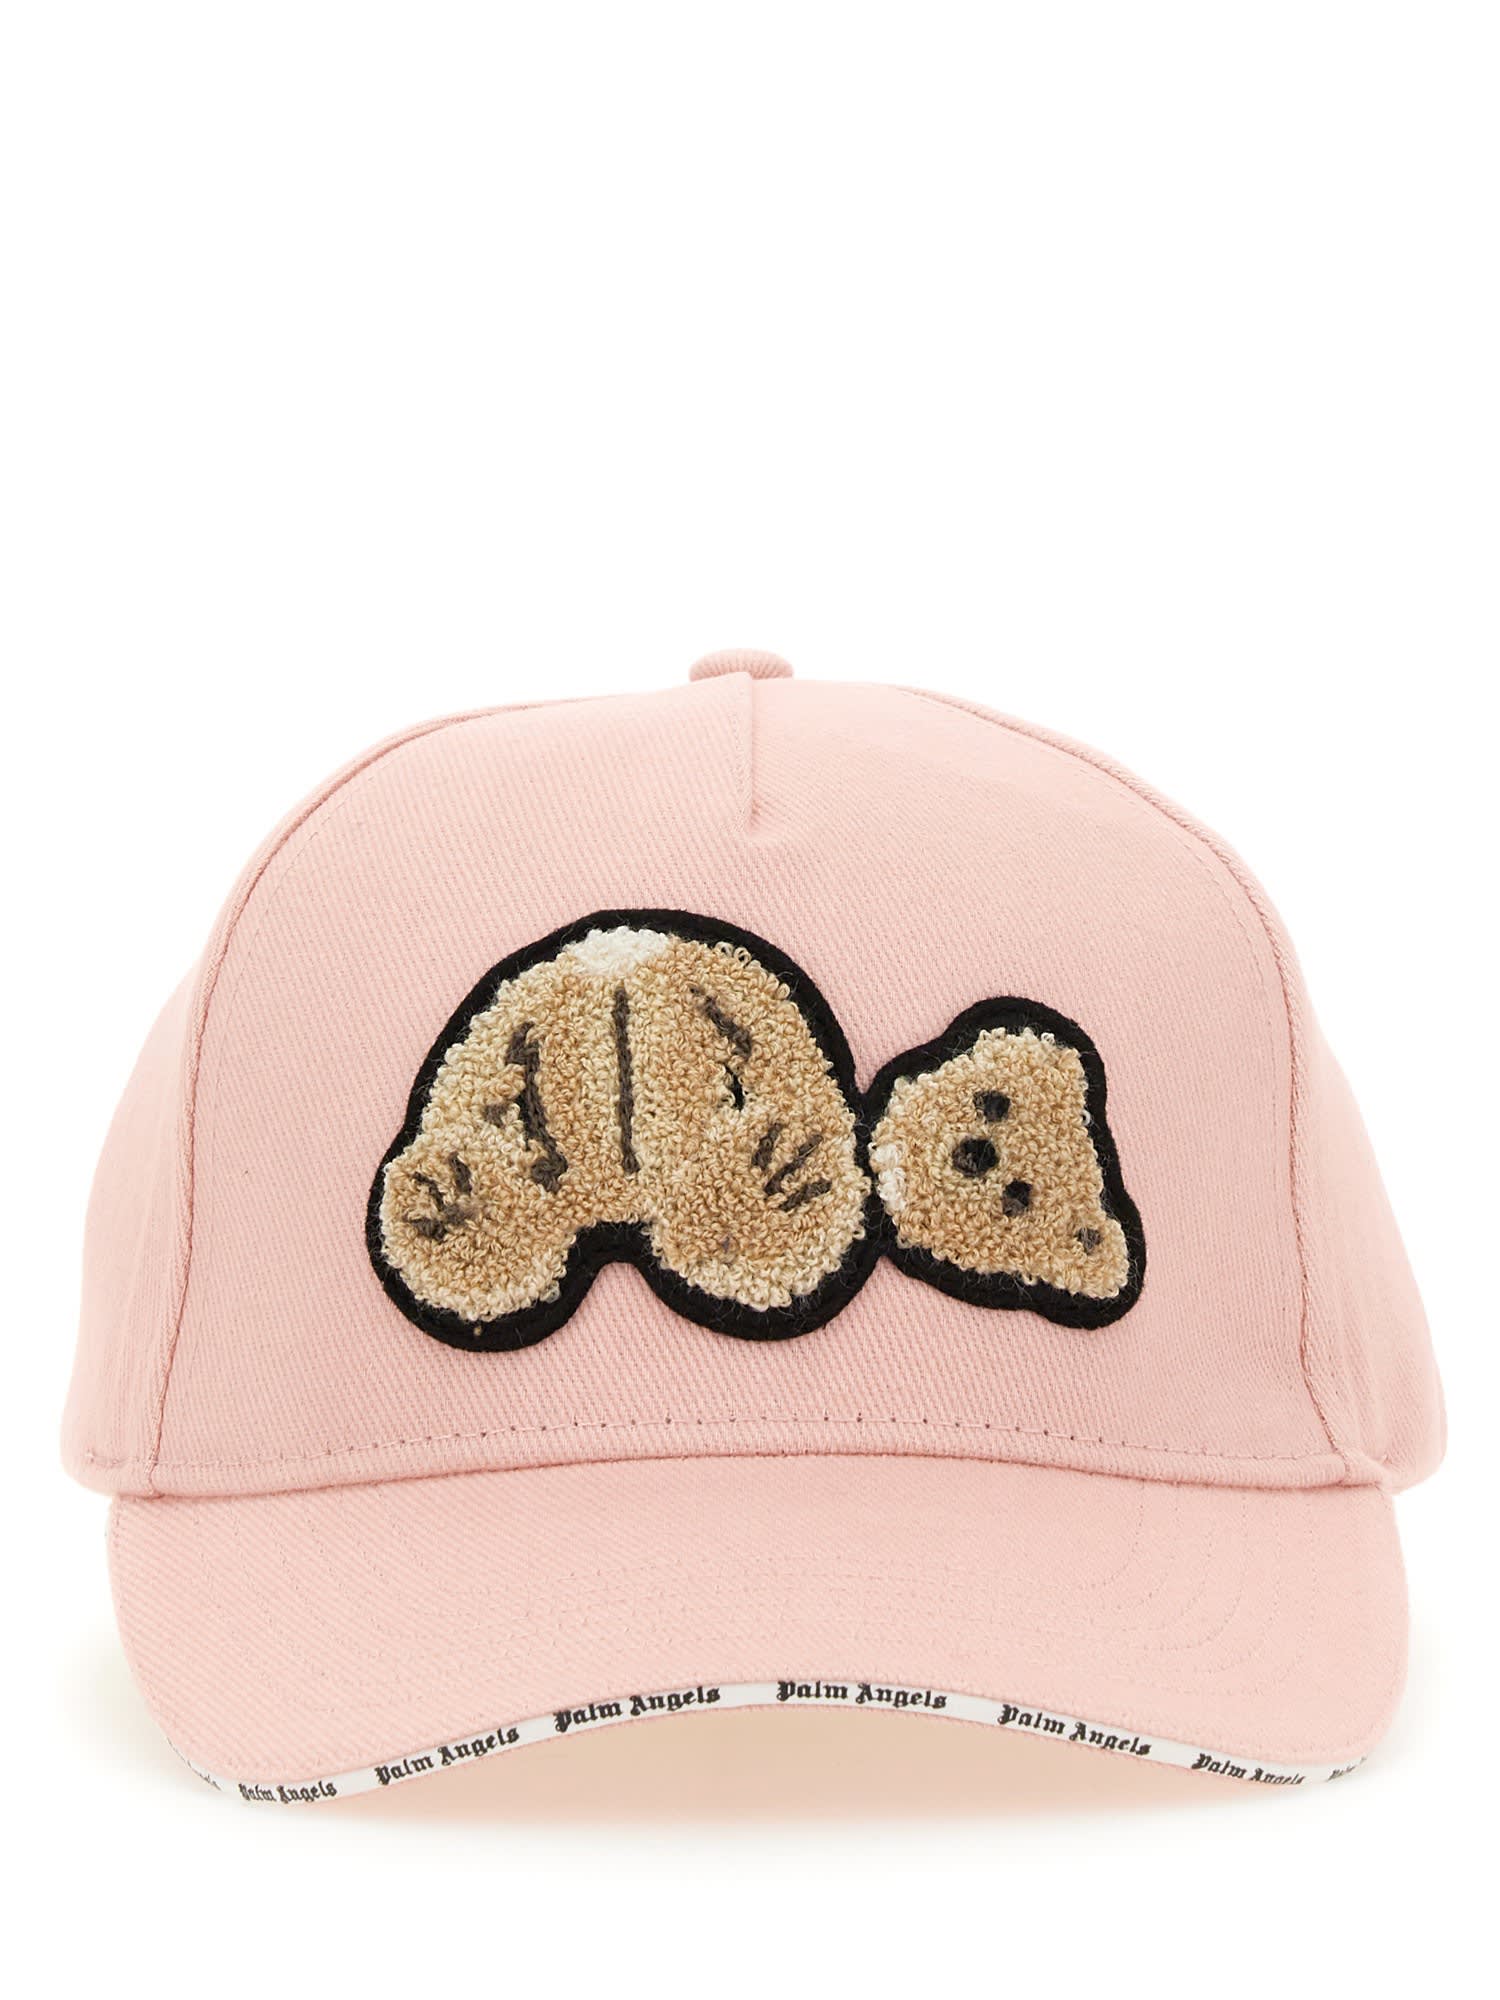 Palm Angels Baseball Hat With Bear Embroidery